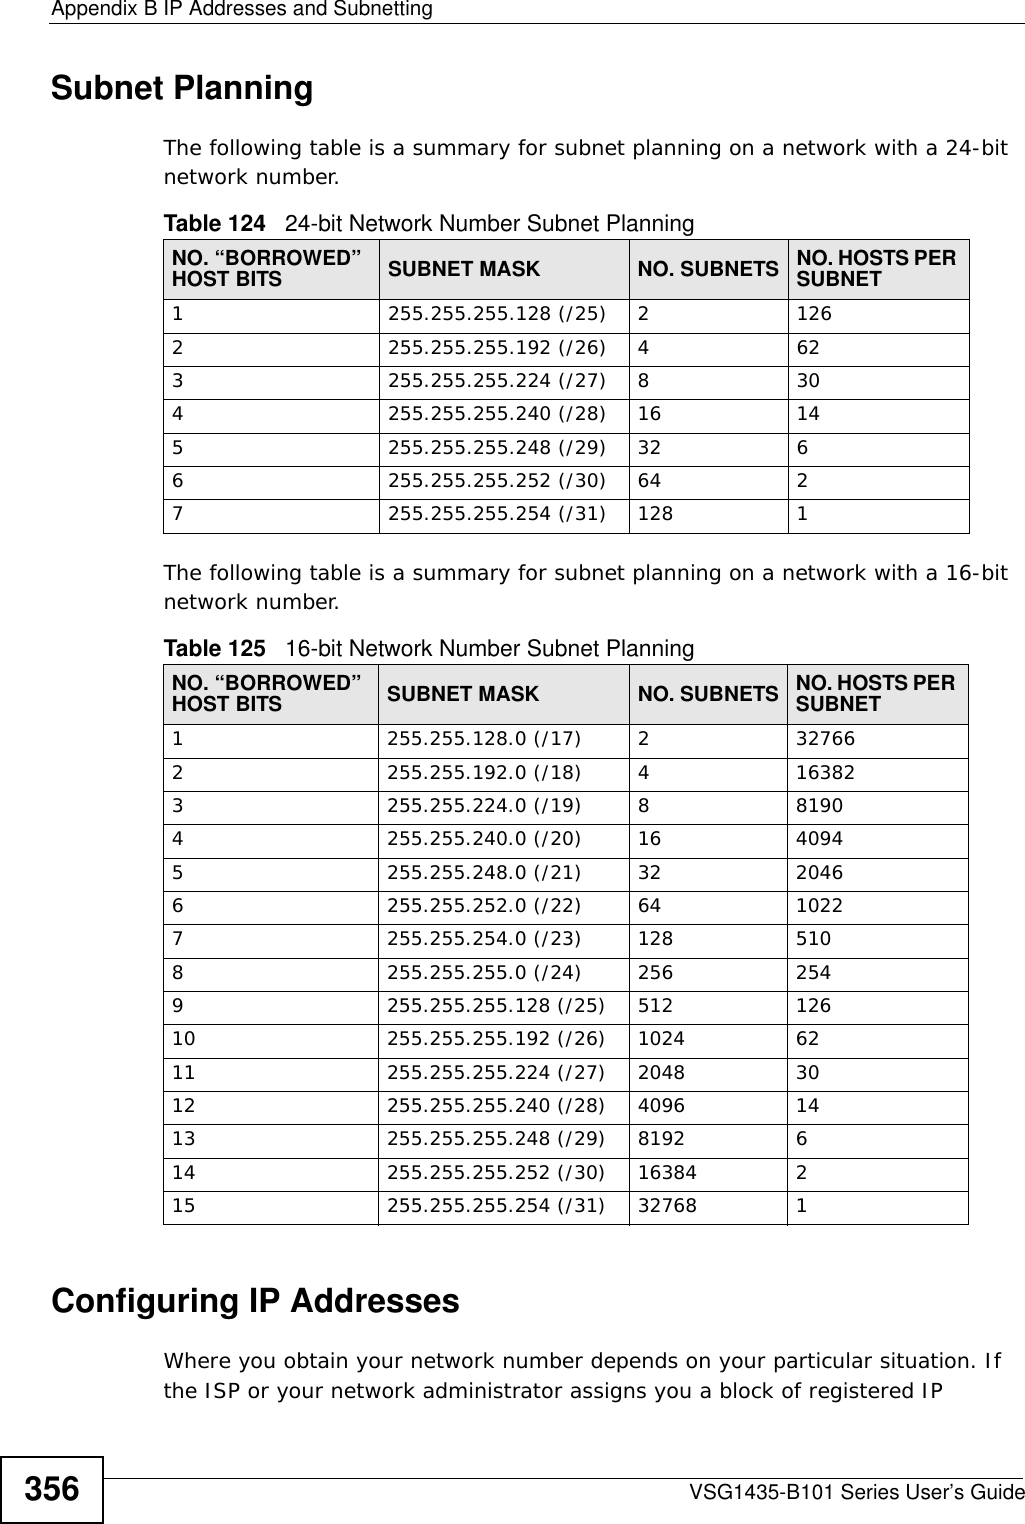 Appendix B IP Addresses and SubnettingVSG1435-B101 Series User’s Guide356Subnet PlanningThe following table is a summary for subnet planning on a network with a 24-bit network number.The following table is a summary for subnet planning on a network with a 16-bit network number. Configuring IP AddressesWhere you obtain your network number depends on your particular situation. If the ISP or your network administrator assigns you a block of registered IP Table 124   24-bit Network Number Subnet PlanningNO. “BORROWED” HOST BITS SUBNET MASK NO. SUBNETS NO. HOSTS PER SUBNET1255.255.255.128 (/25) 21262255.255.255.192 (/26) 4623255.255.255.224 (/27) 8304255.255.255.240 (/28) 16 145255.255.255.248 (/29) 32 66255.255.255.252 (/30) 64 27255.255.255.254 (/31) 128 1Table 125   16-bit Network Number Subnet PlanningNO. “BORROWED” HOST BITS SUBNET MASK NO. SUBNETS NO. HOSTS PER SUBNET1255.255.128.0 (/17) 2327662255.255.192.0 (/18) 4163823255.255.224.0 (/19) 881904255.255.240.0 (/20) 16 40945255.255.248.0 (/21) 32 20466255.255.252.0 (/22) 64 10227255.255.254.0 (/23) 128 5108255.255.255.0 (/24) 256 2549255.255.255.128 (/25) 512 12610 255.255.255.192 (/26) 1024 6211 255.255.255.224 (/27) 2048 3012 255.255.255.240 (/28) 4096 1413 255.255.255.248 (/29) 8192 614 255.255.255.252 (/30) 16384 215 255.255.255.254 (/31) 32768 1